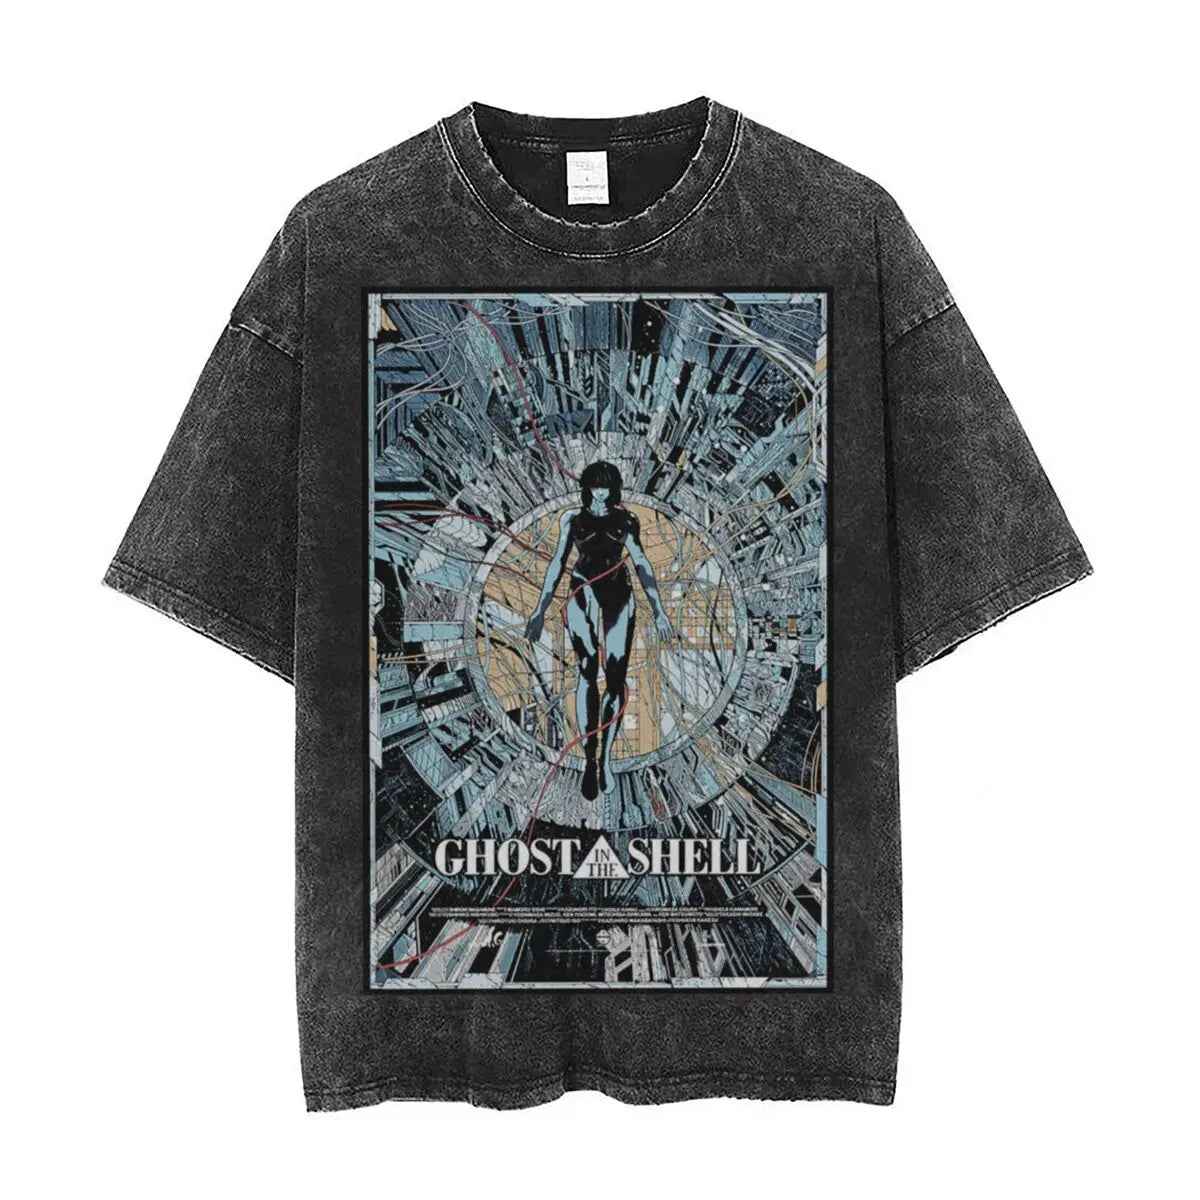 This t-shirt blends the high-tech world of Ghost with contemporary style. If you are looking for more Ghost In The Shell Merch, We have it all! | Check out all our Anime Merch now!